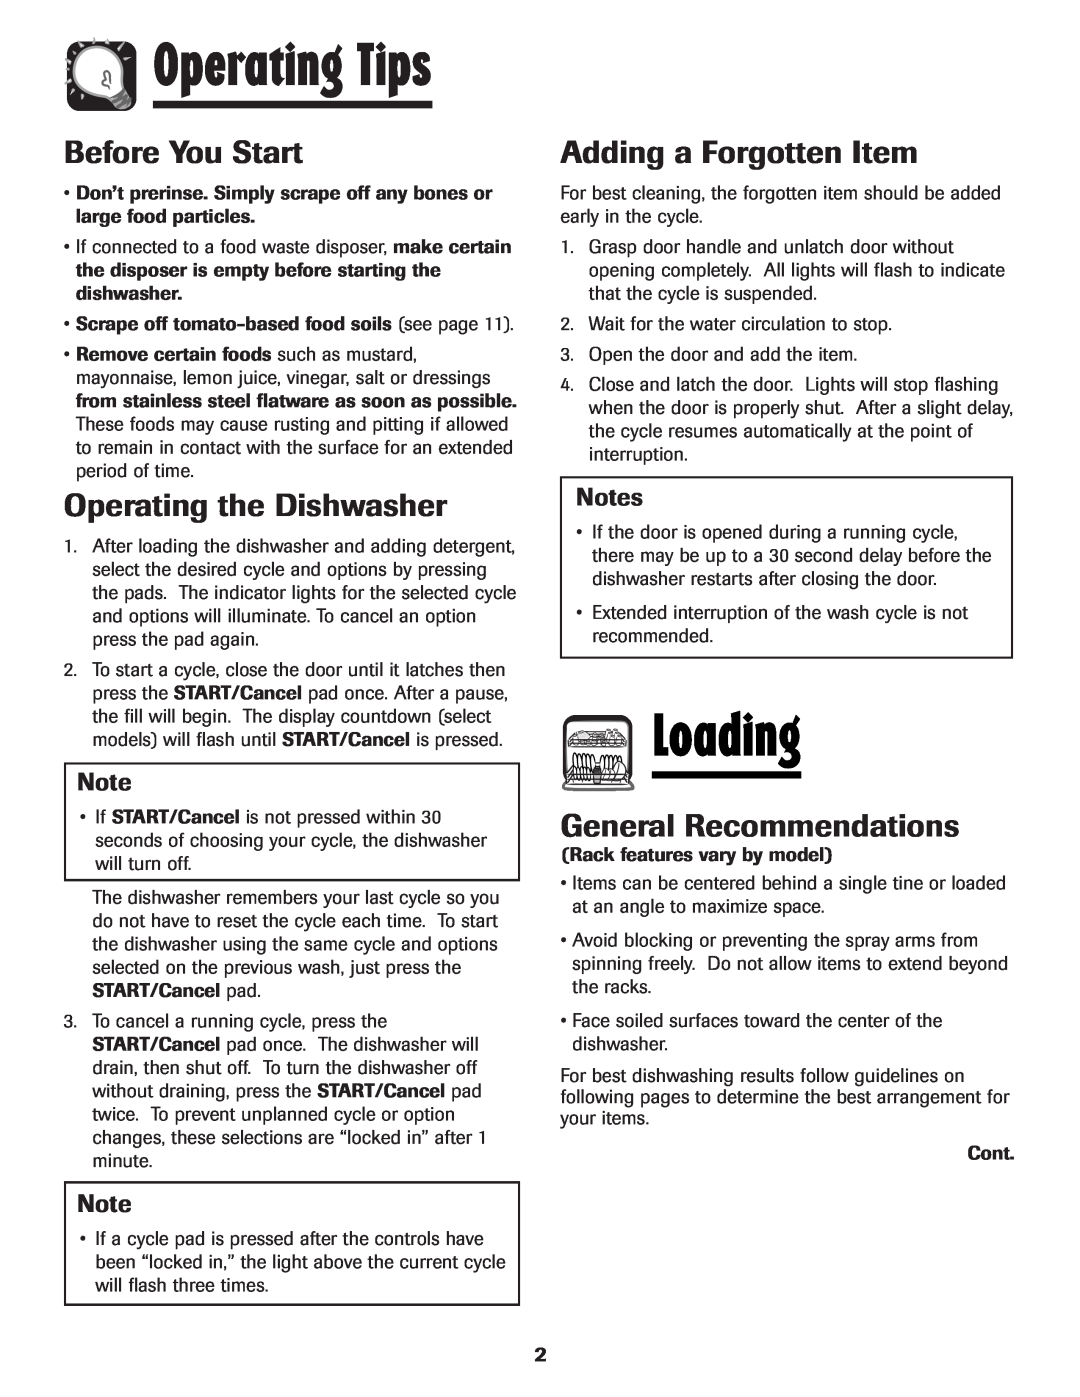 Maytag MDB-5 warranty Loading, Before You Start, Operating the Dishwasher, Adding a Forgotten Item, General Recommendations 